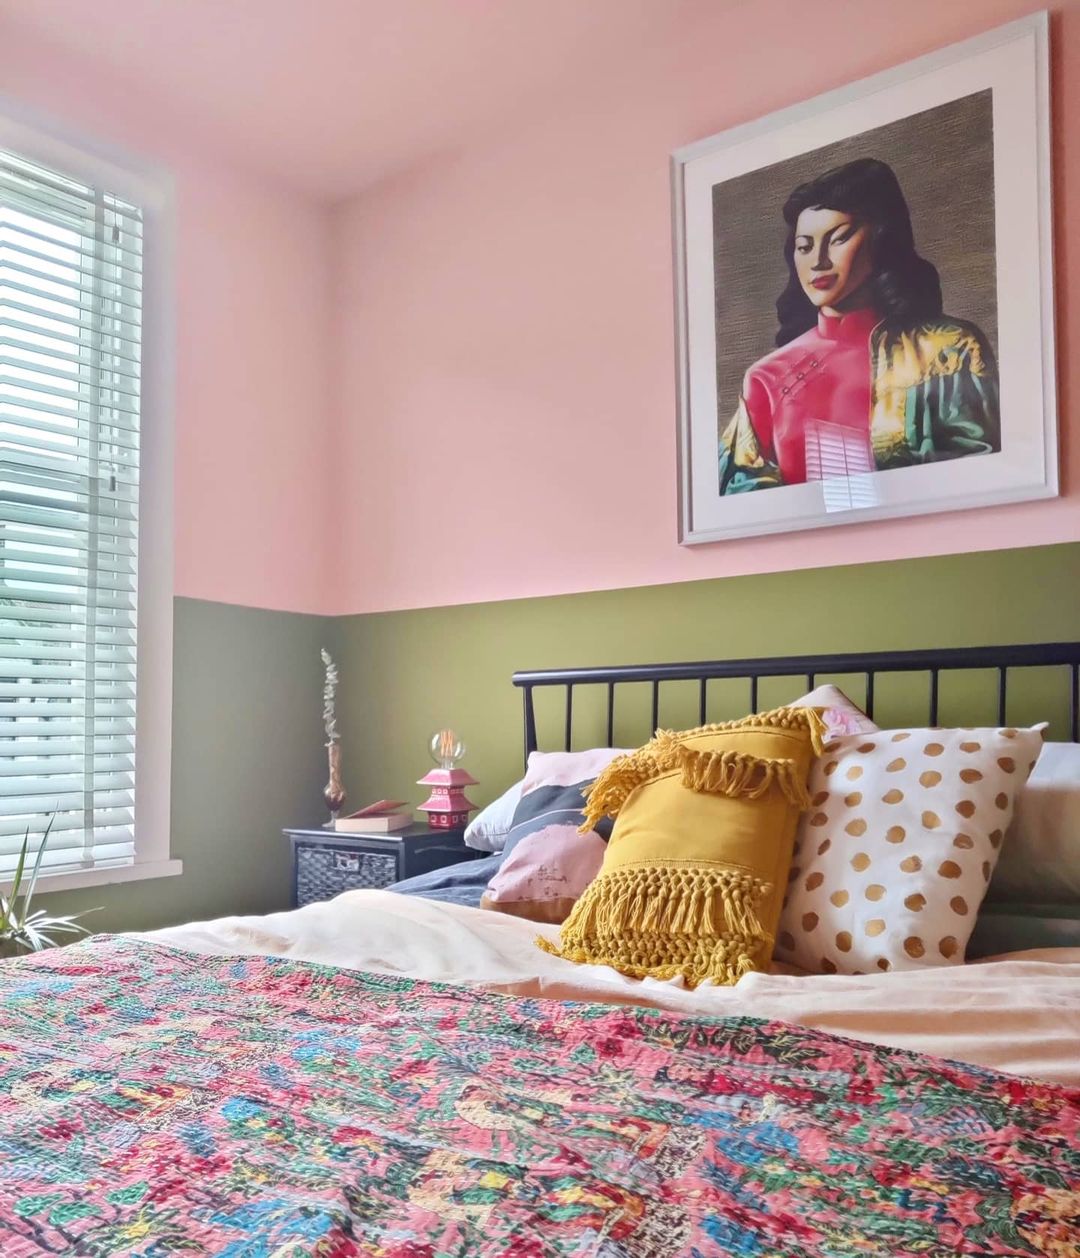 Go for Two Tone Walls: Pink and green